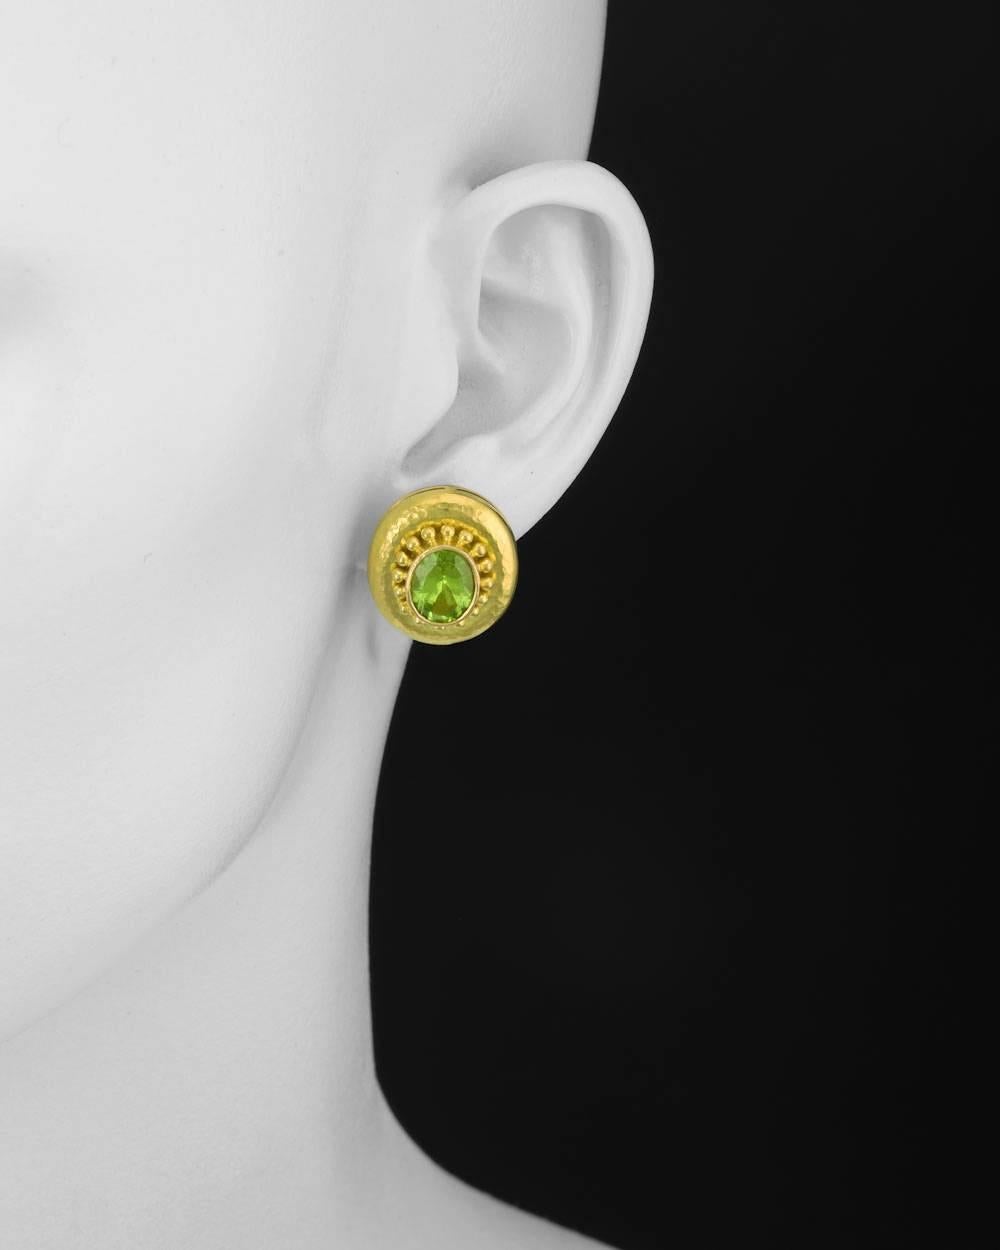 Oval-shaped peridot earrings, the peridot mounted in a hammered 18k yellow gold frame with beaded granulation, with clips and folding posts, signed Elizabeth Locke. 0.85